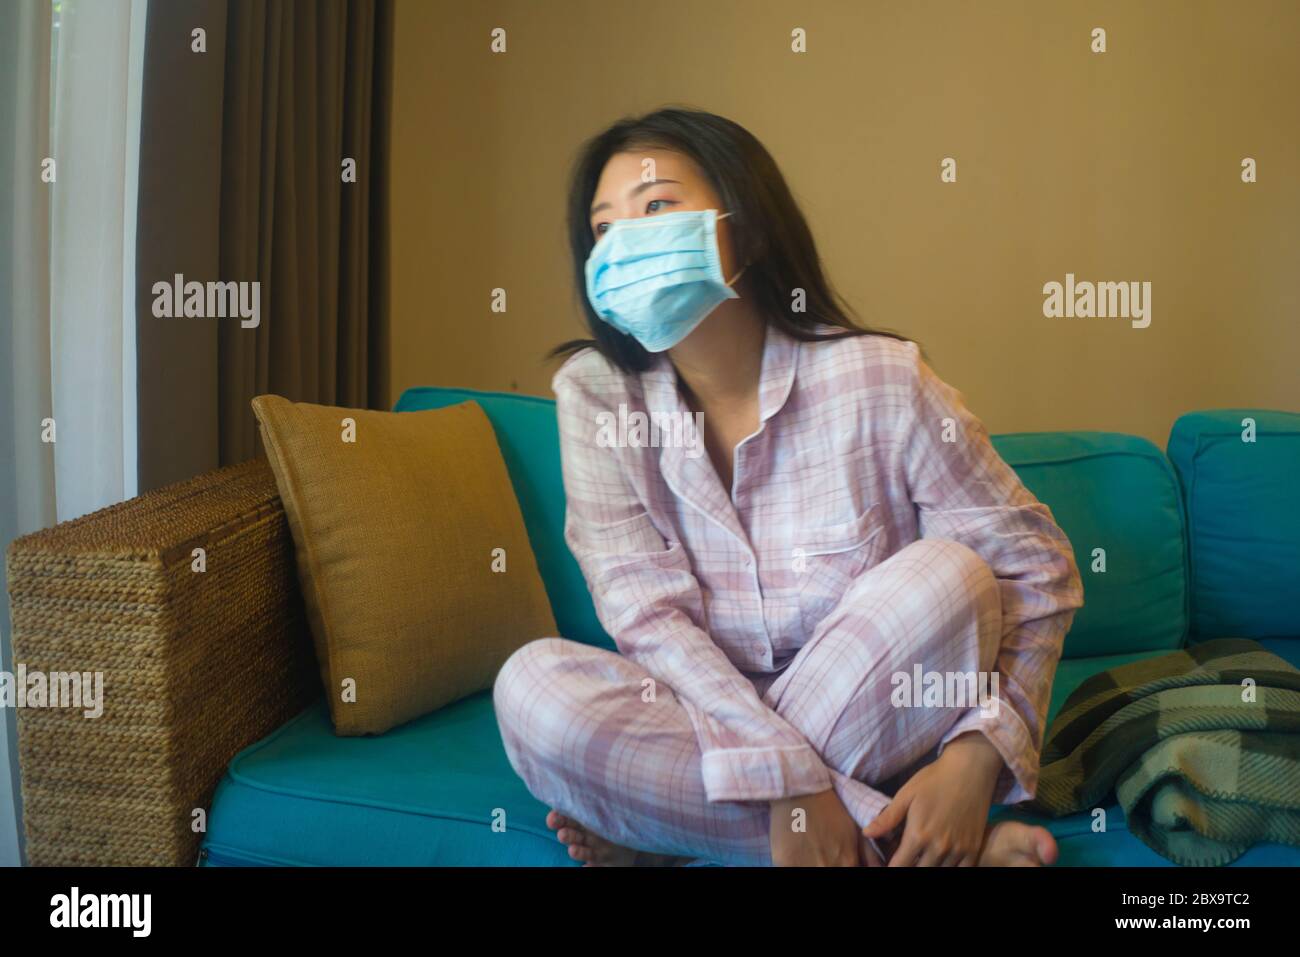 Quarantine And Home Lockdown Young Beautiful Stressed And Worried Asian Korean Woman In Pajamas On Couch In Surgical Mask Feeling Sad And Scared Abo Stock Photo Alamy